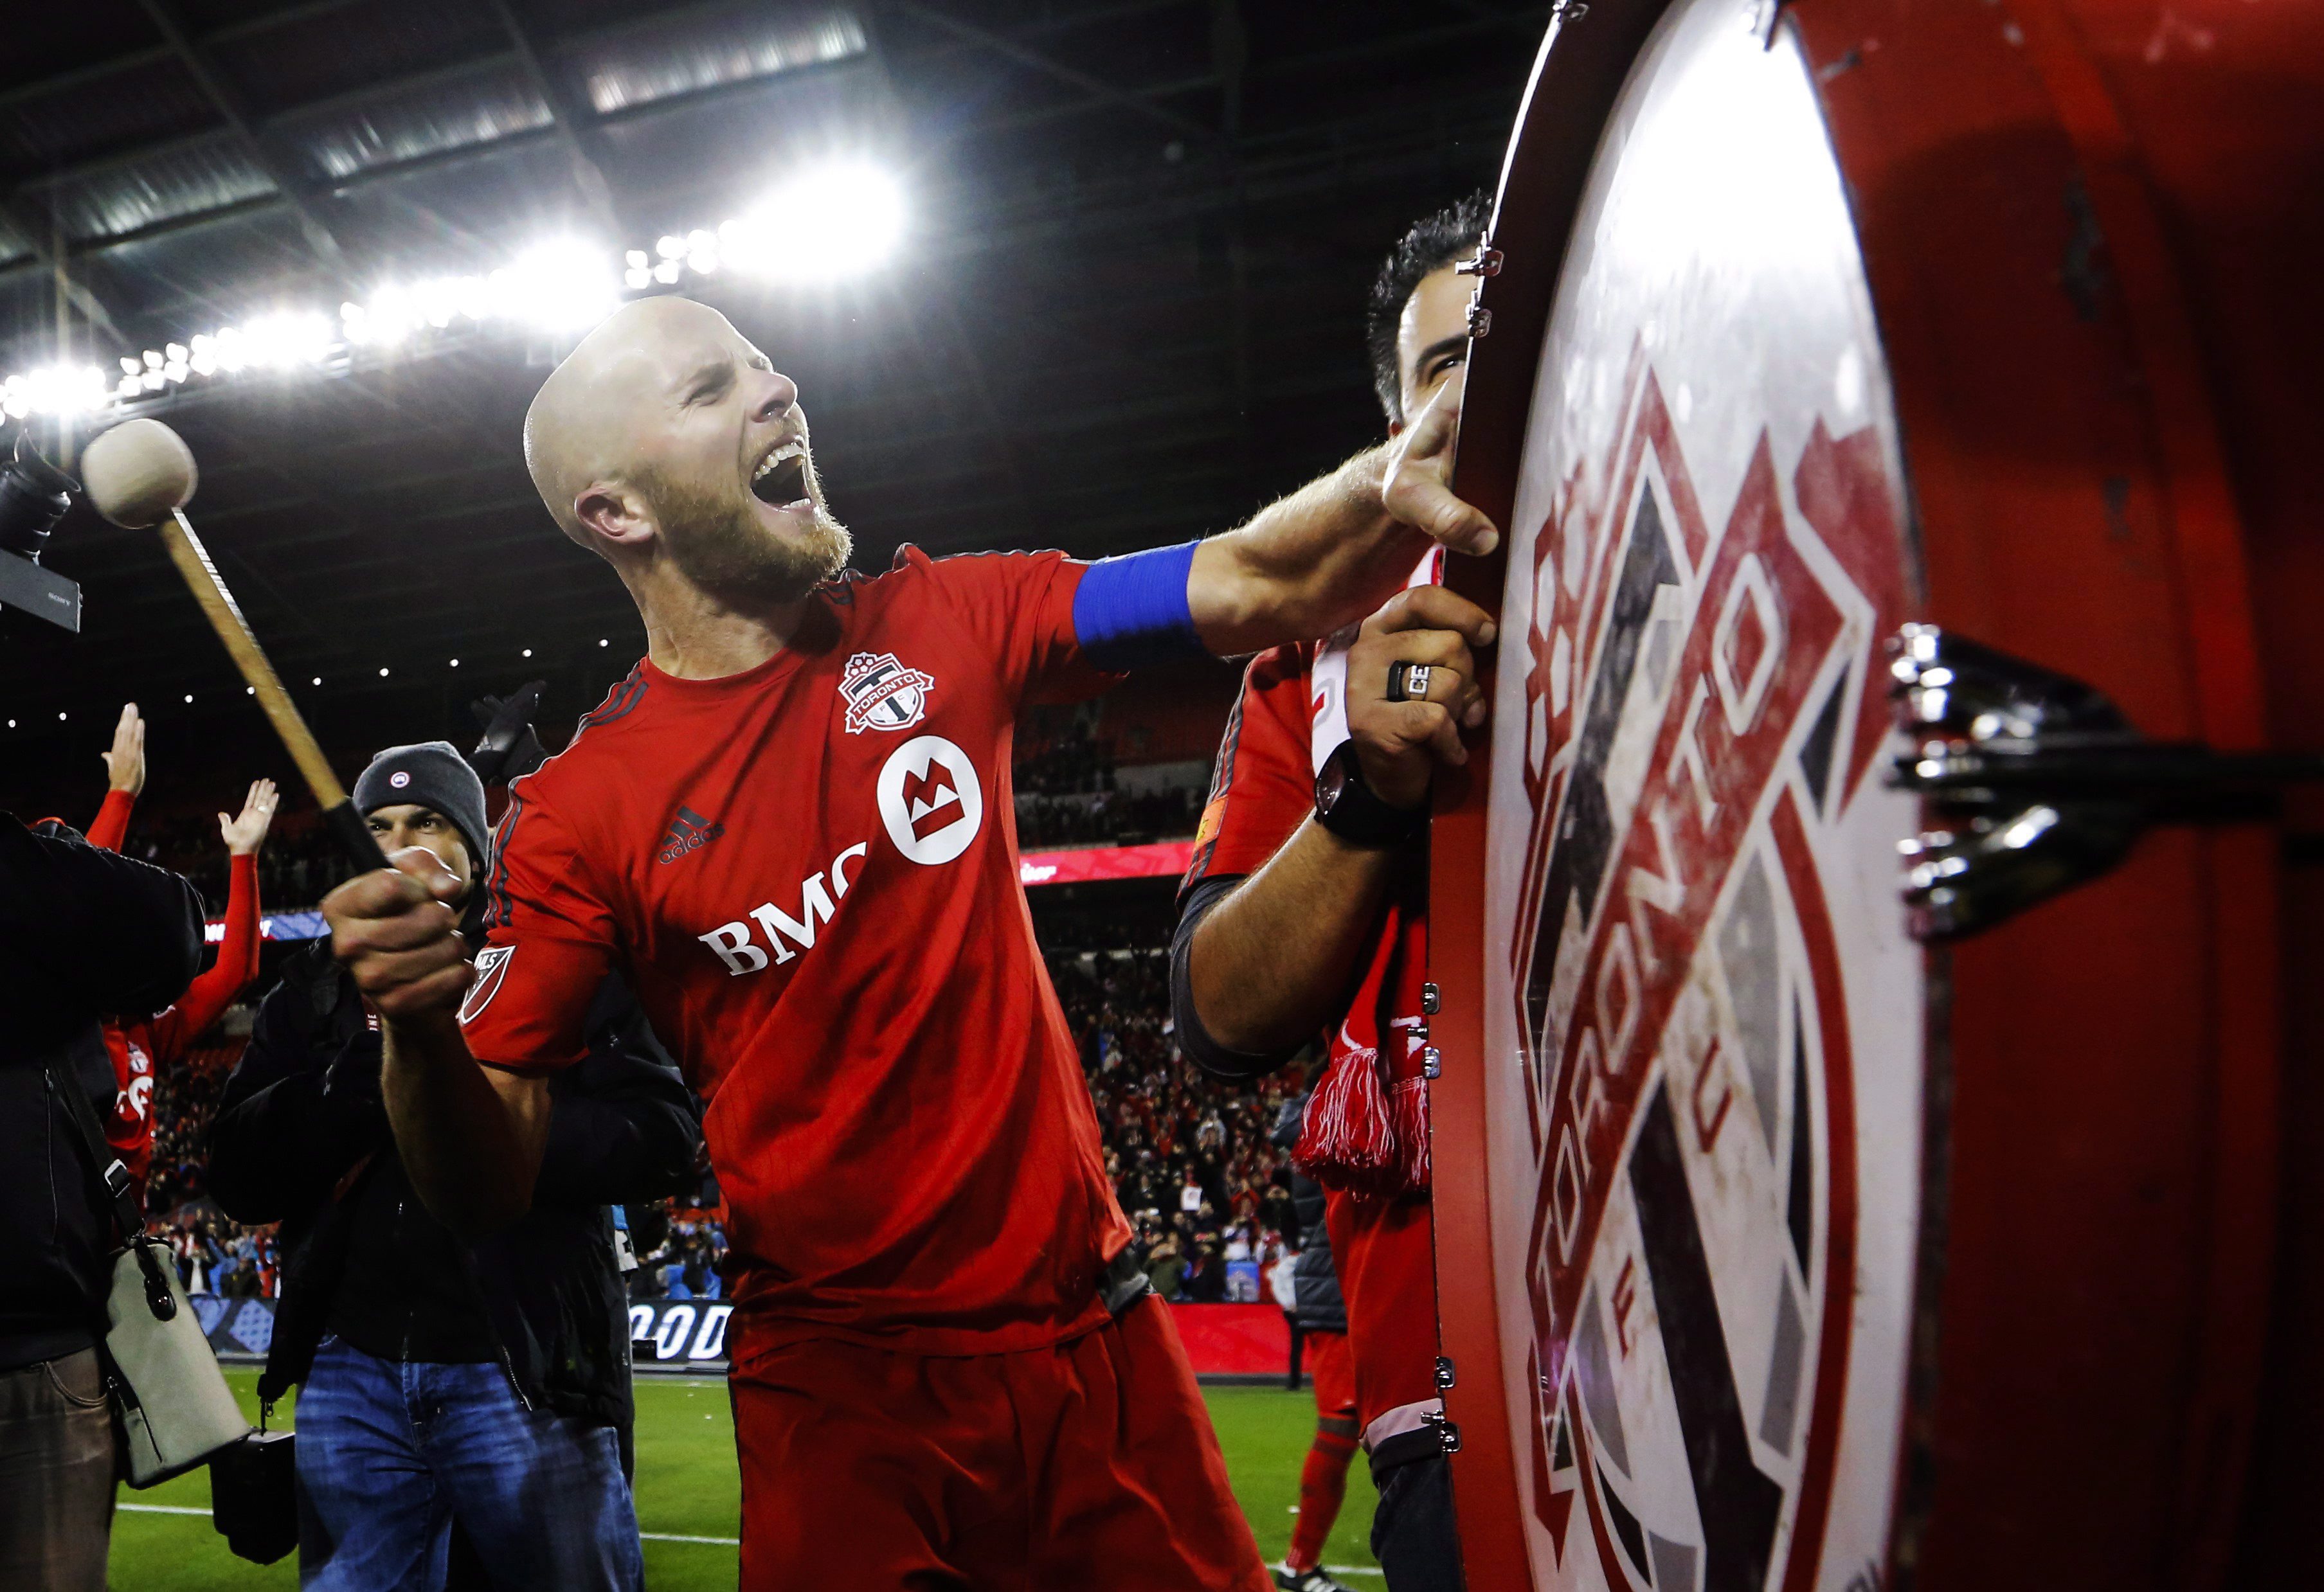 Toronto FC VS New England ( BETTING TIPS, Match Preview & Expert Analysis )™